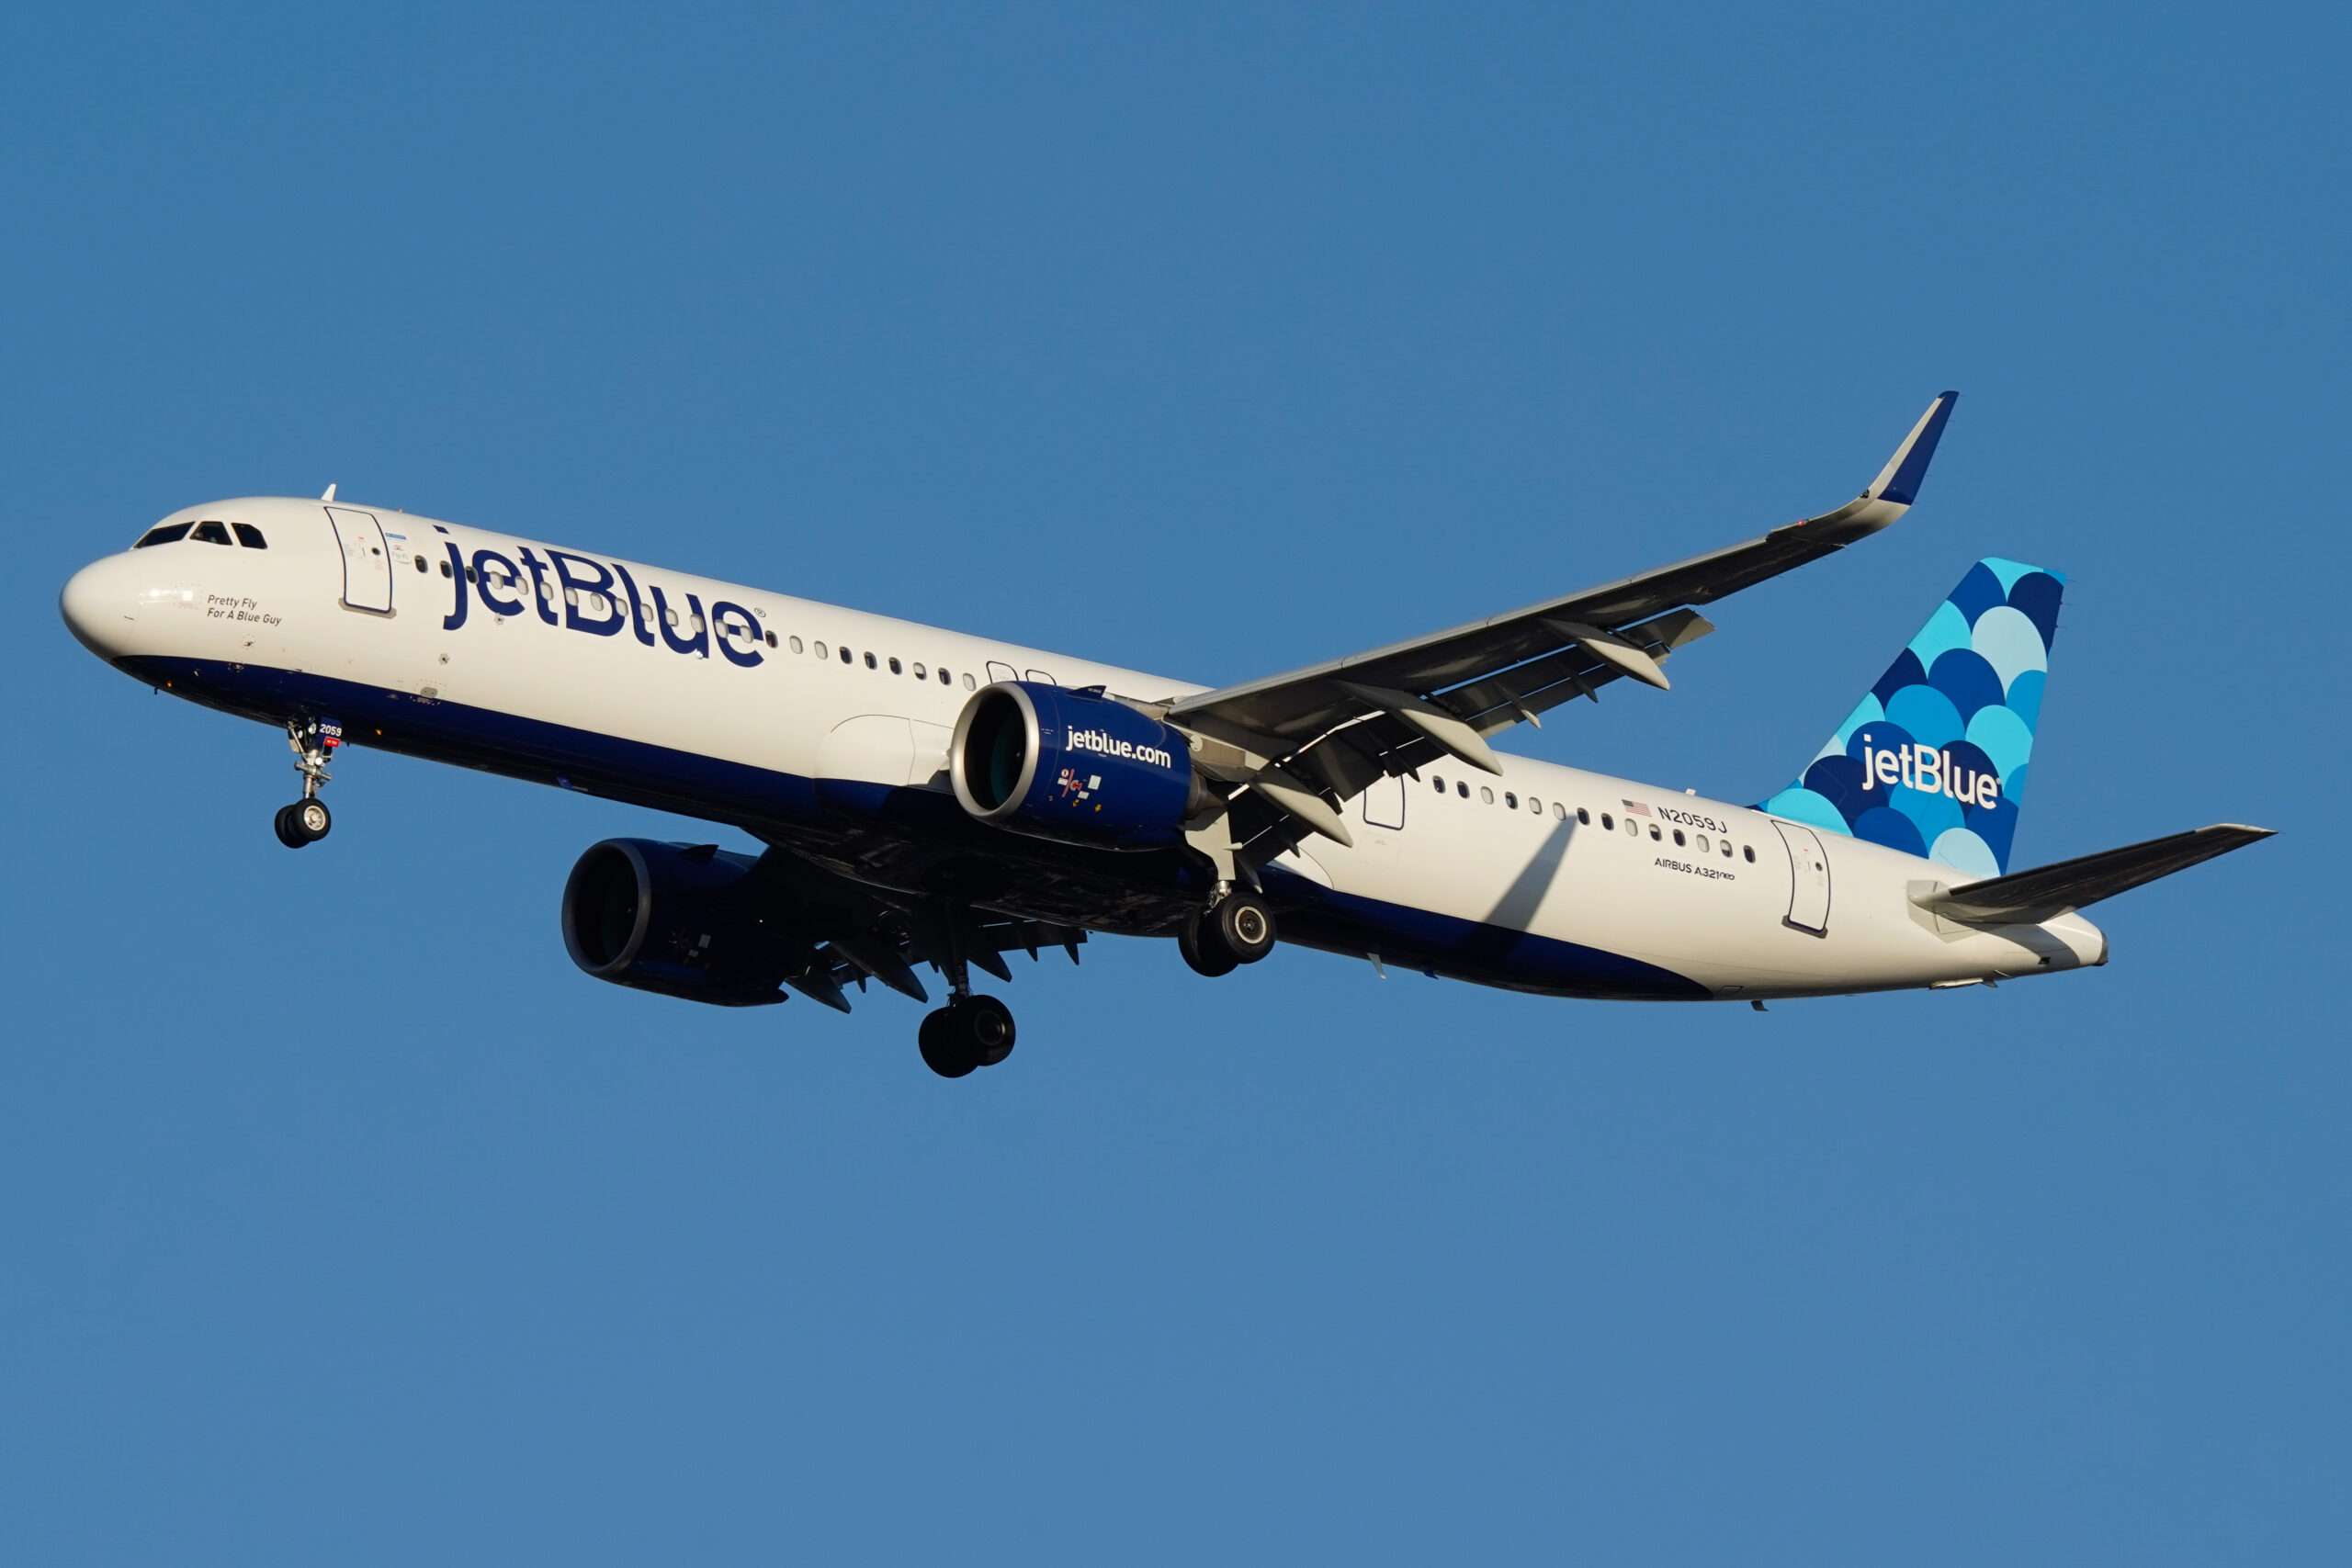 JetBlue has this week received their 30th Airbus A321neo aircraft, with the delivery coming from the Mobile plant and delivered to Melbourne, Florida.